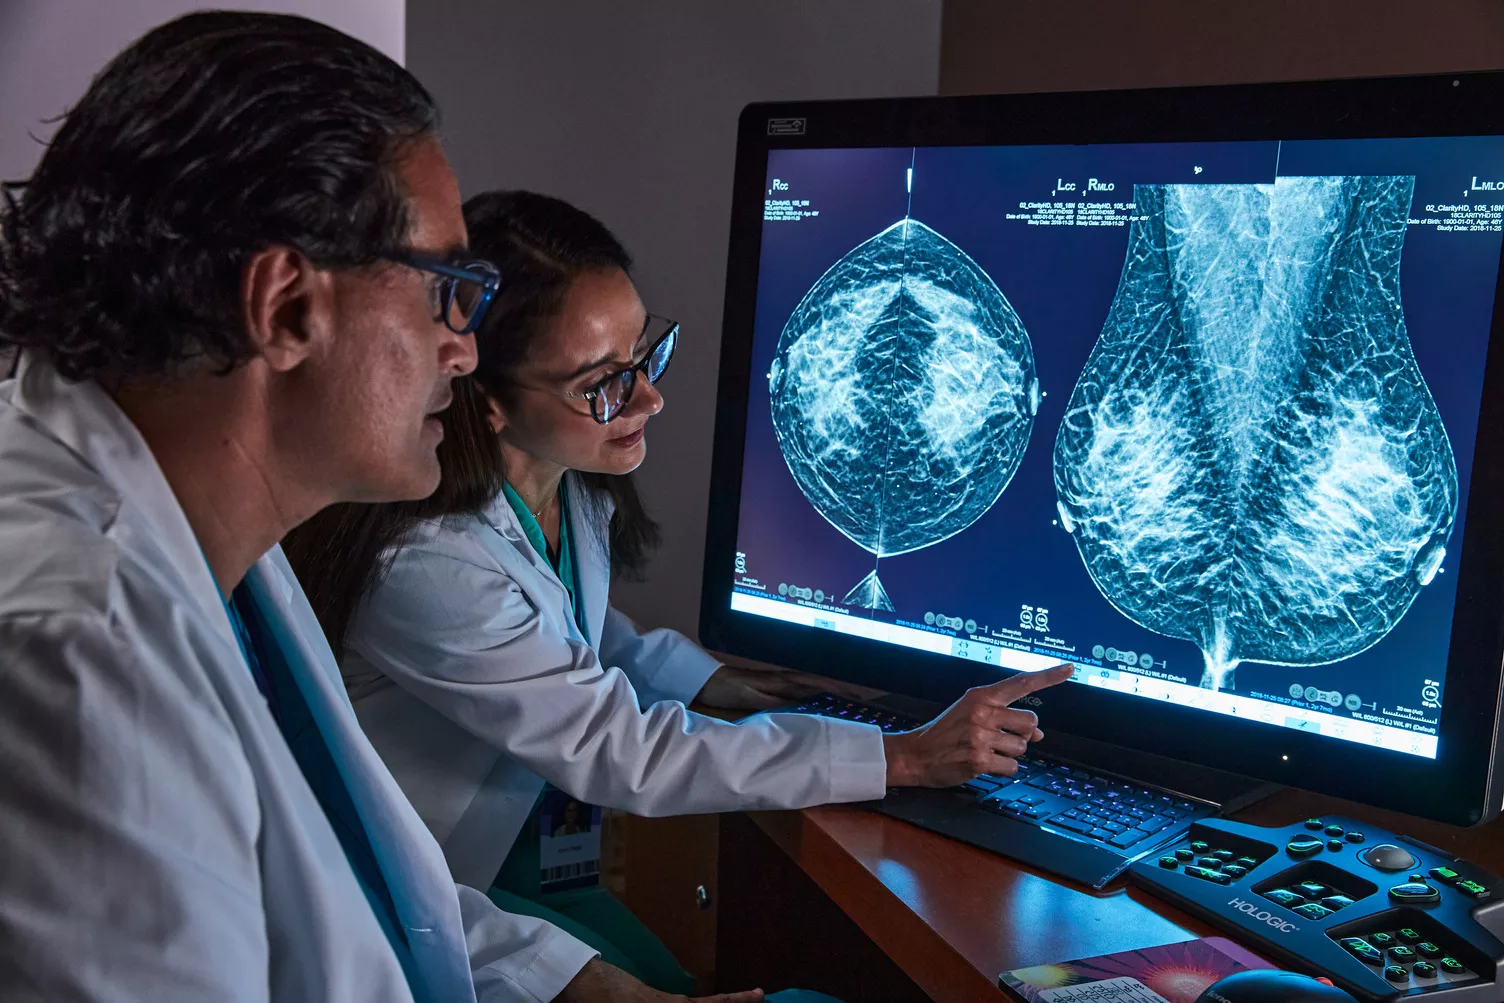 Healthcare professional pointing to breast scan image on monitor